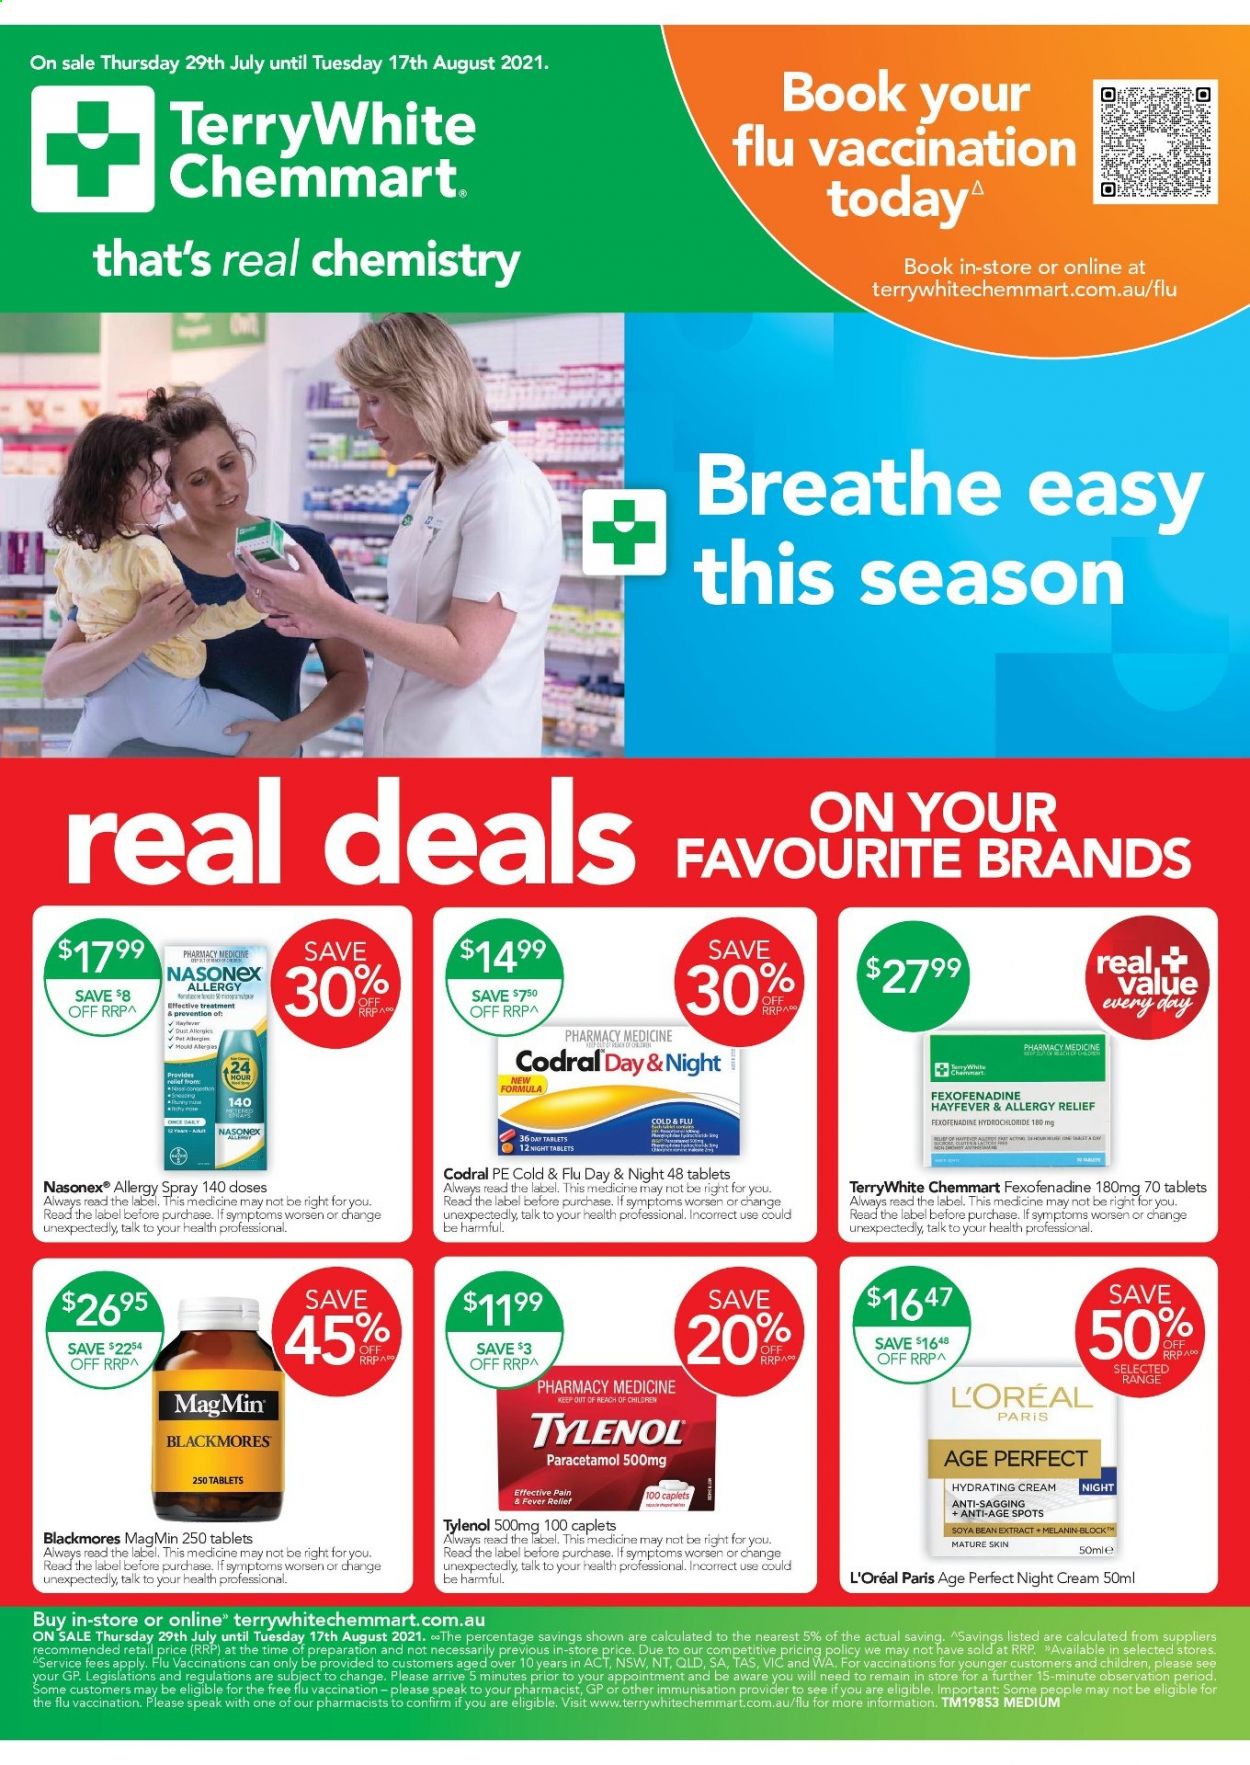 thumbnail - TerryWhite Chemmart Catalogue - 29 Jul 2021 - 17 Aug 2021 - Sales products - Nana, L’Oréal, night cream, Cold & Flu, Tylenol, Blackmores, allergy relief, Codral. Page 1.